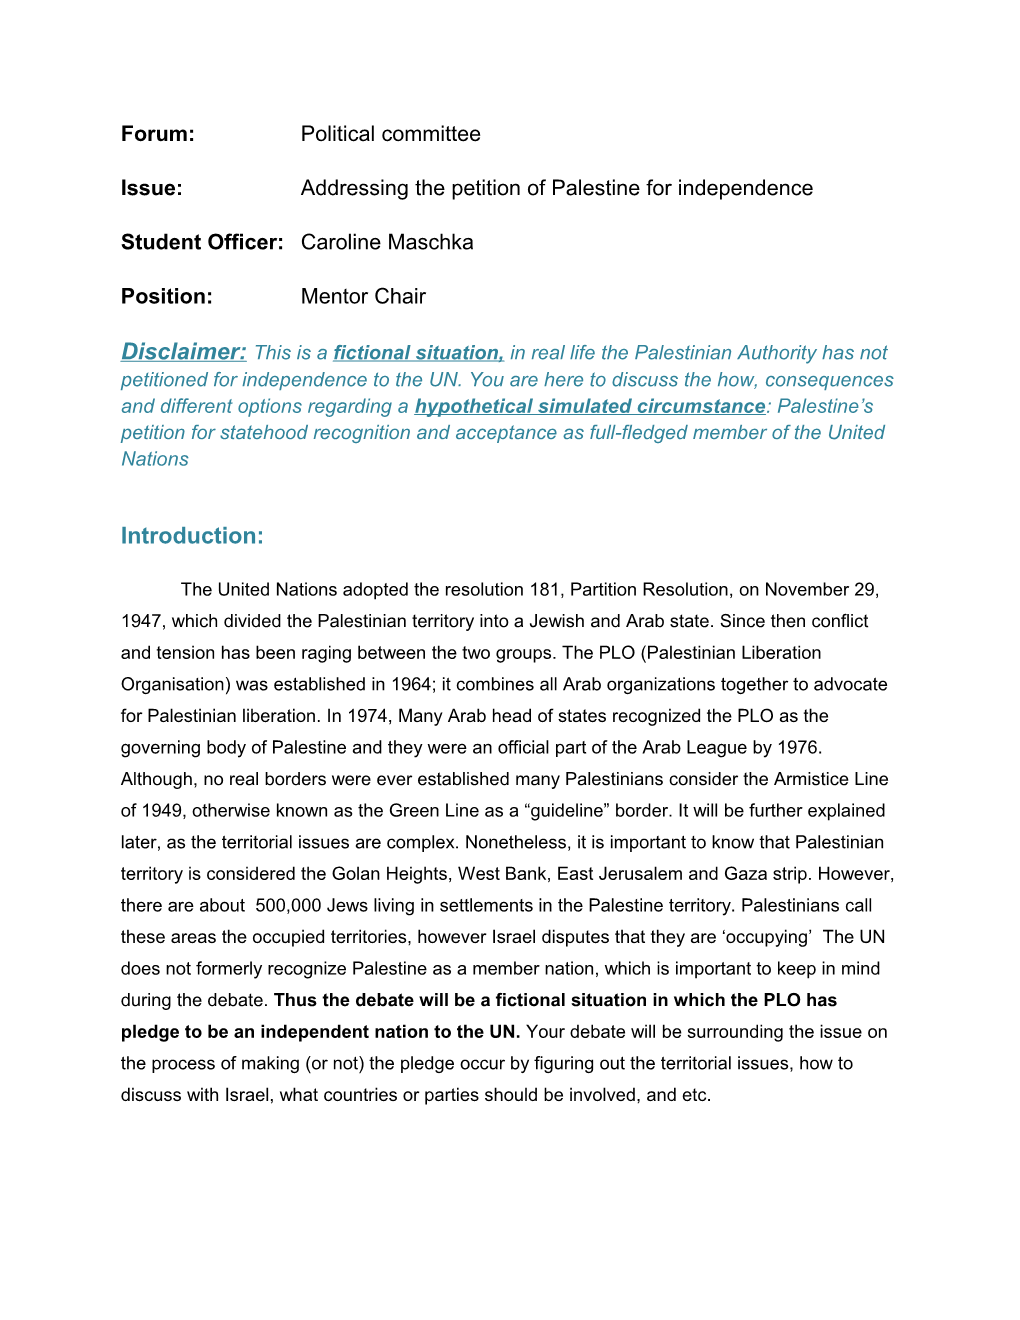 Issue: Addressing the Petition of Palestine for Independence